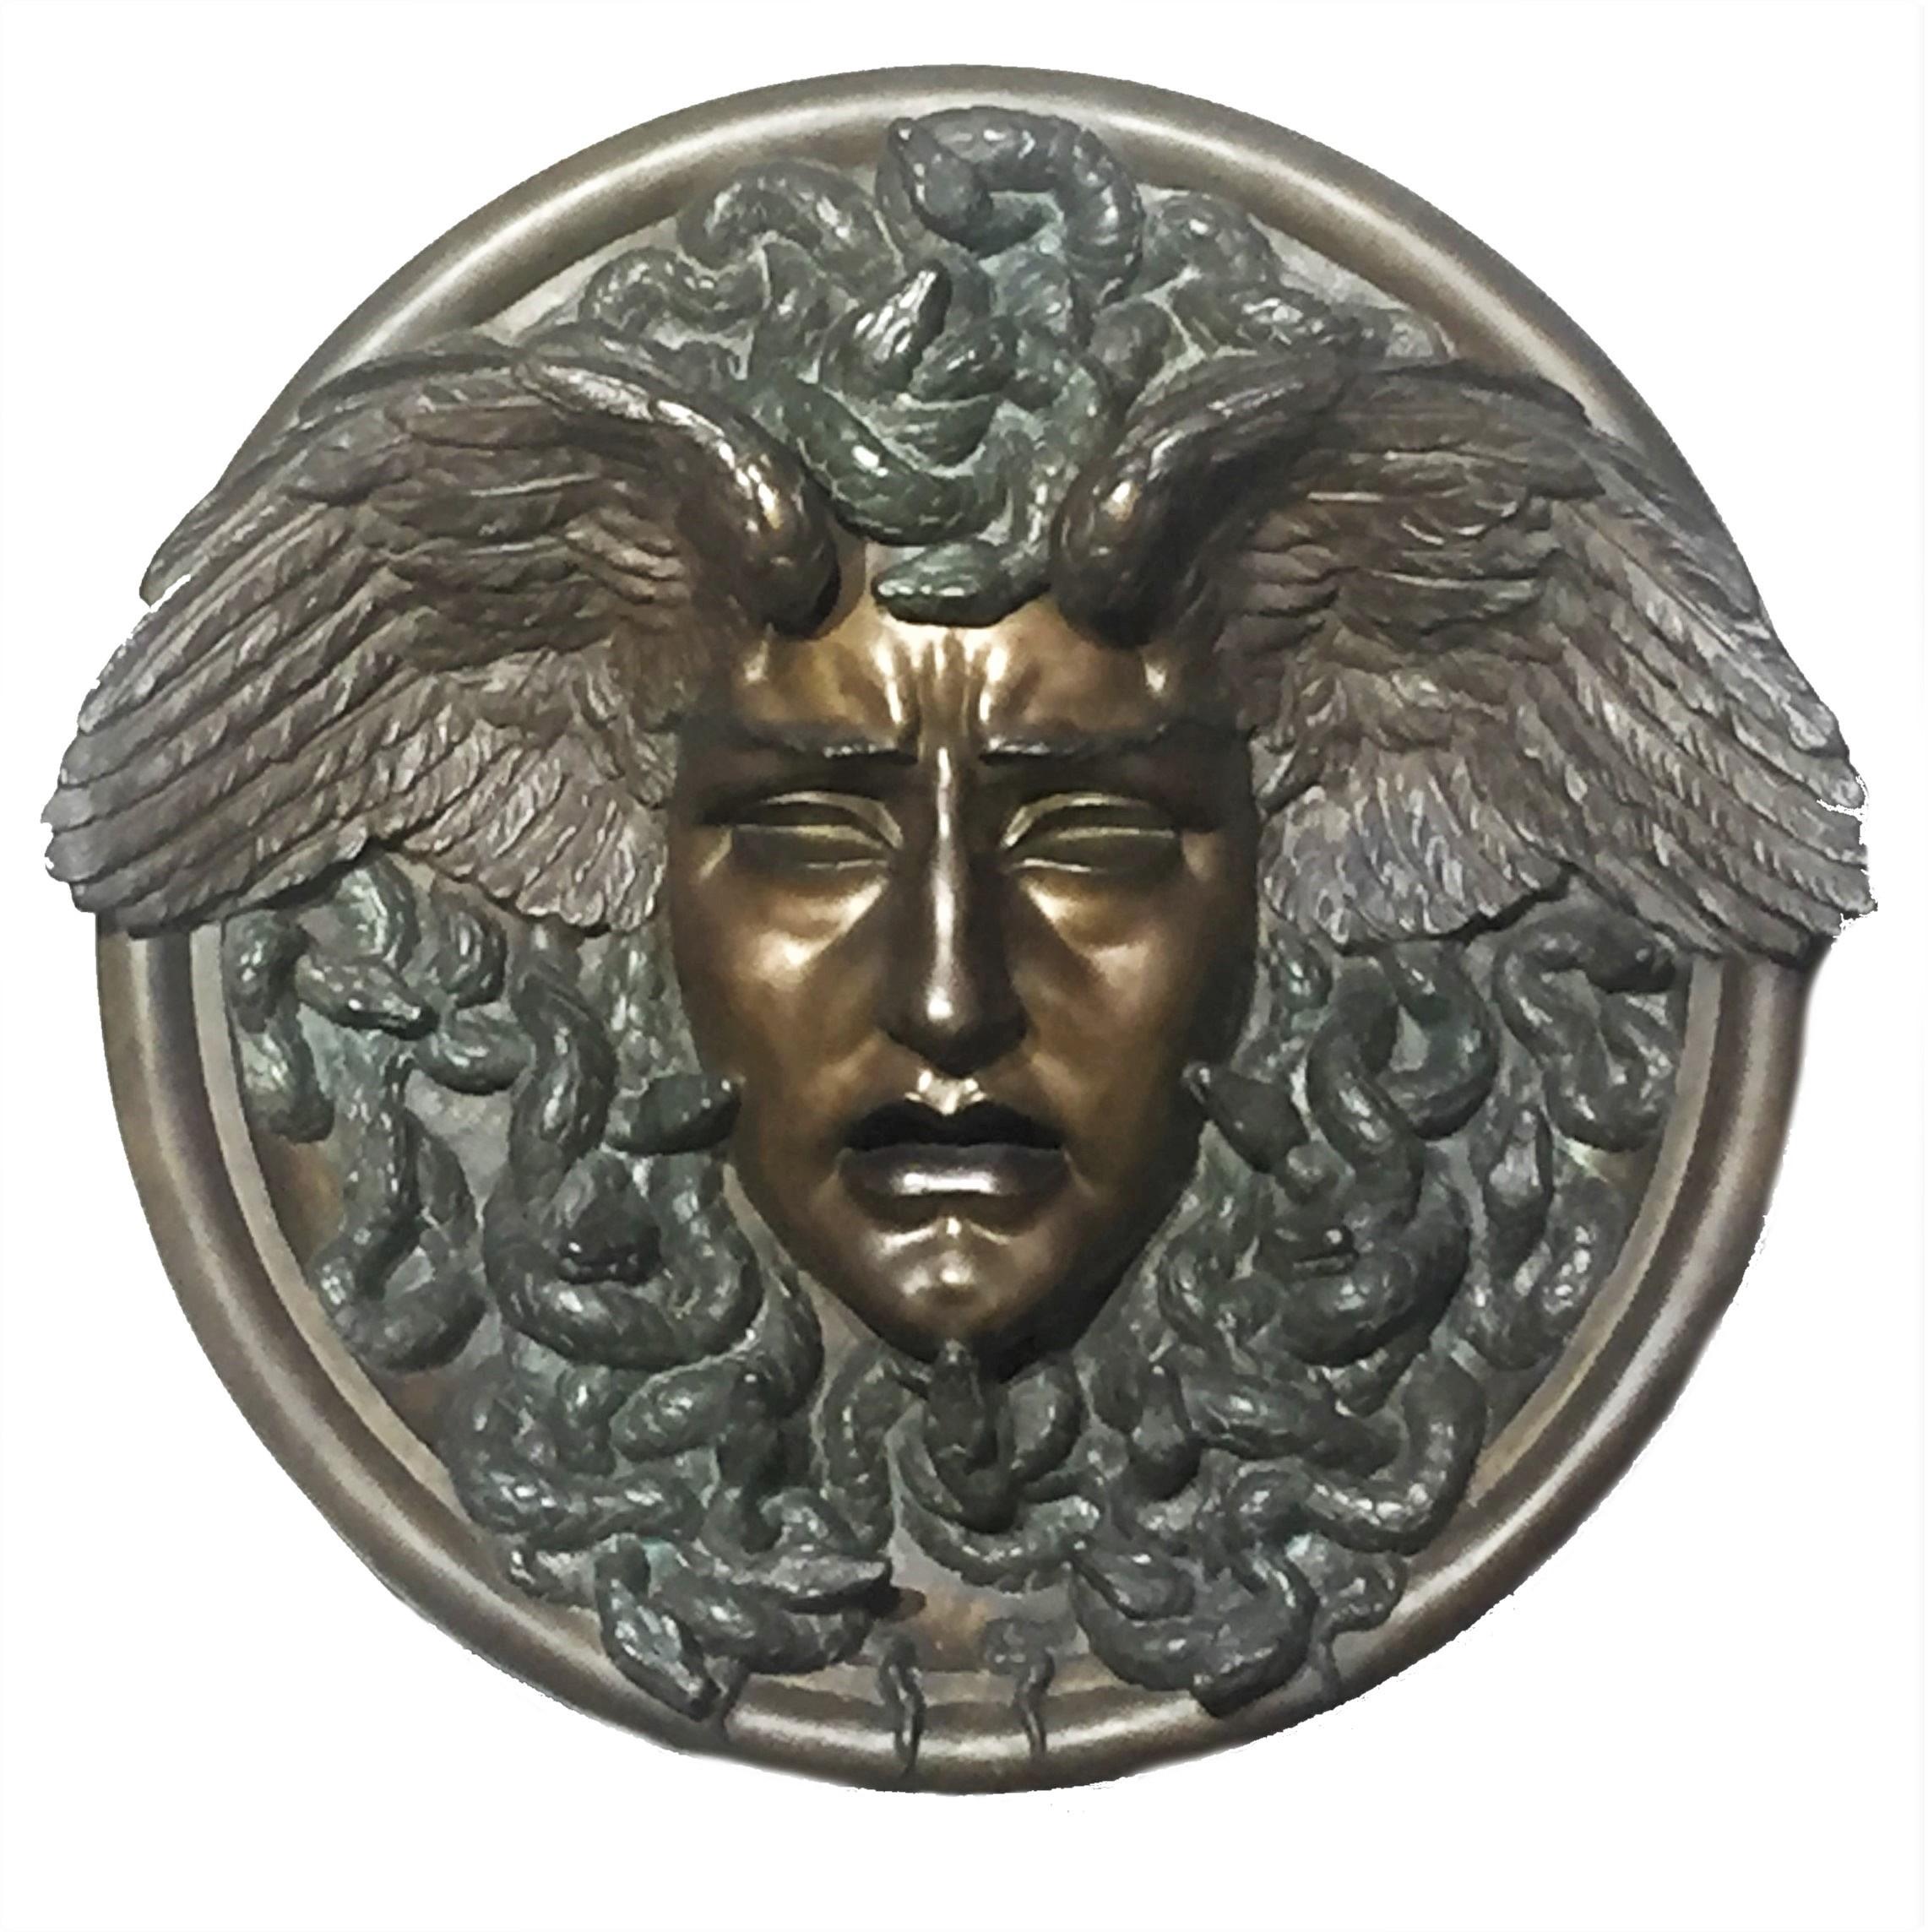 We proudly present this very rare and outstandingly beautiful Novecento Italiano multi-color patinated bronze bas-relief medallion of Medusa, created by the world-famous Italian sculptor Fausta Vittoria Mengarini. 

This impressive monumental